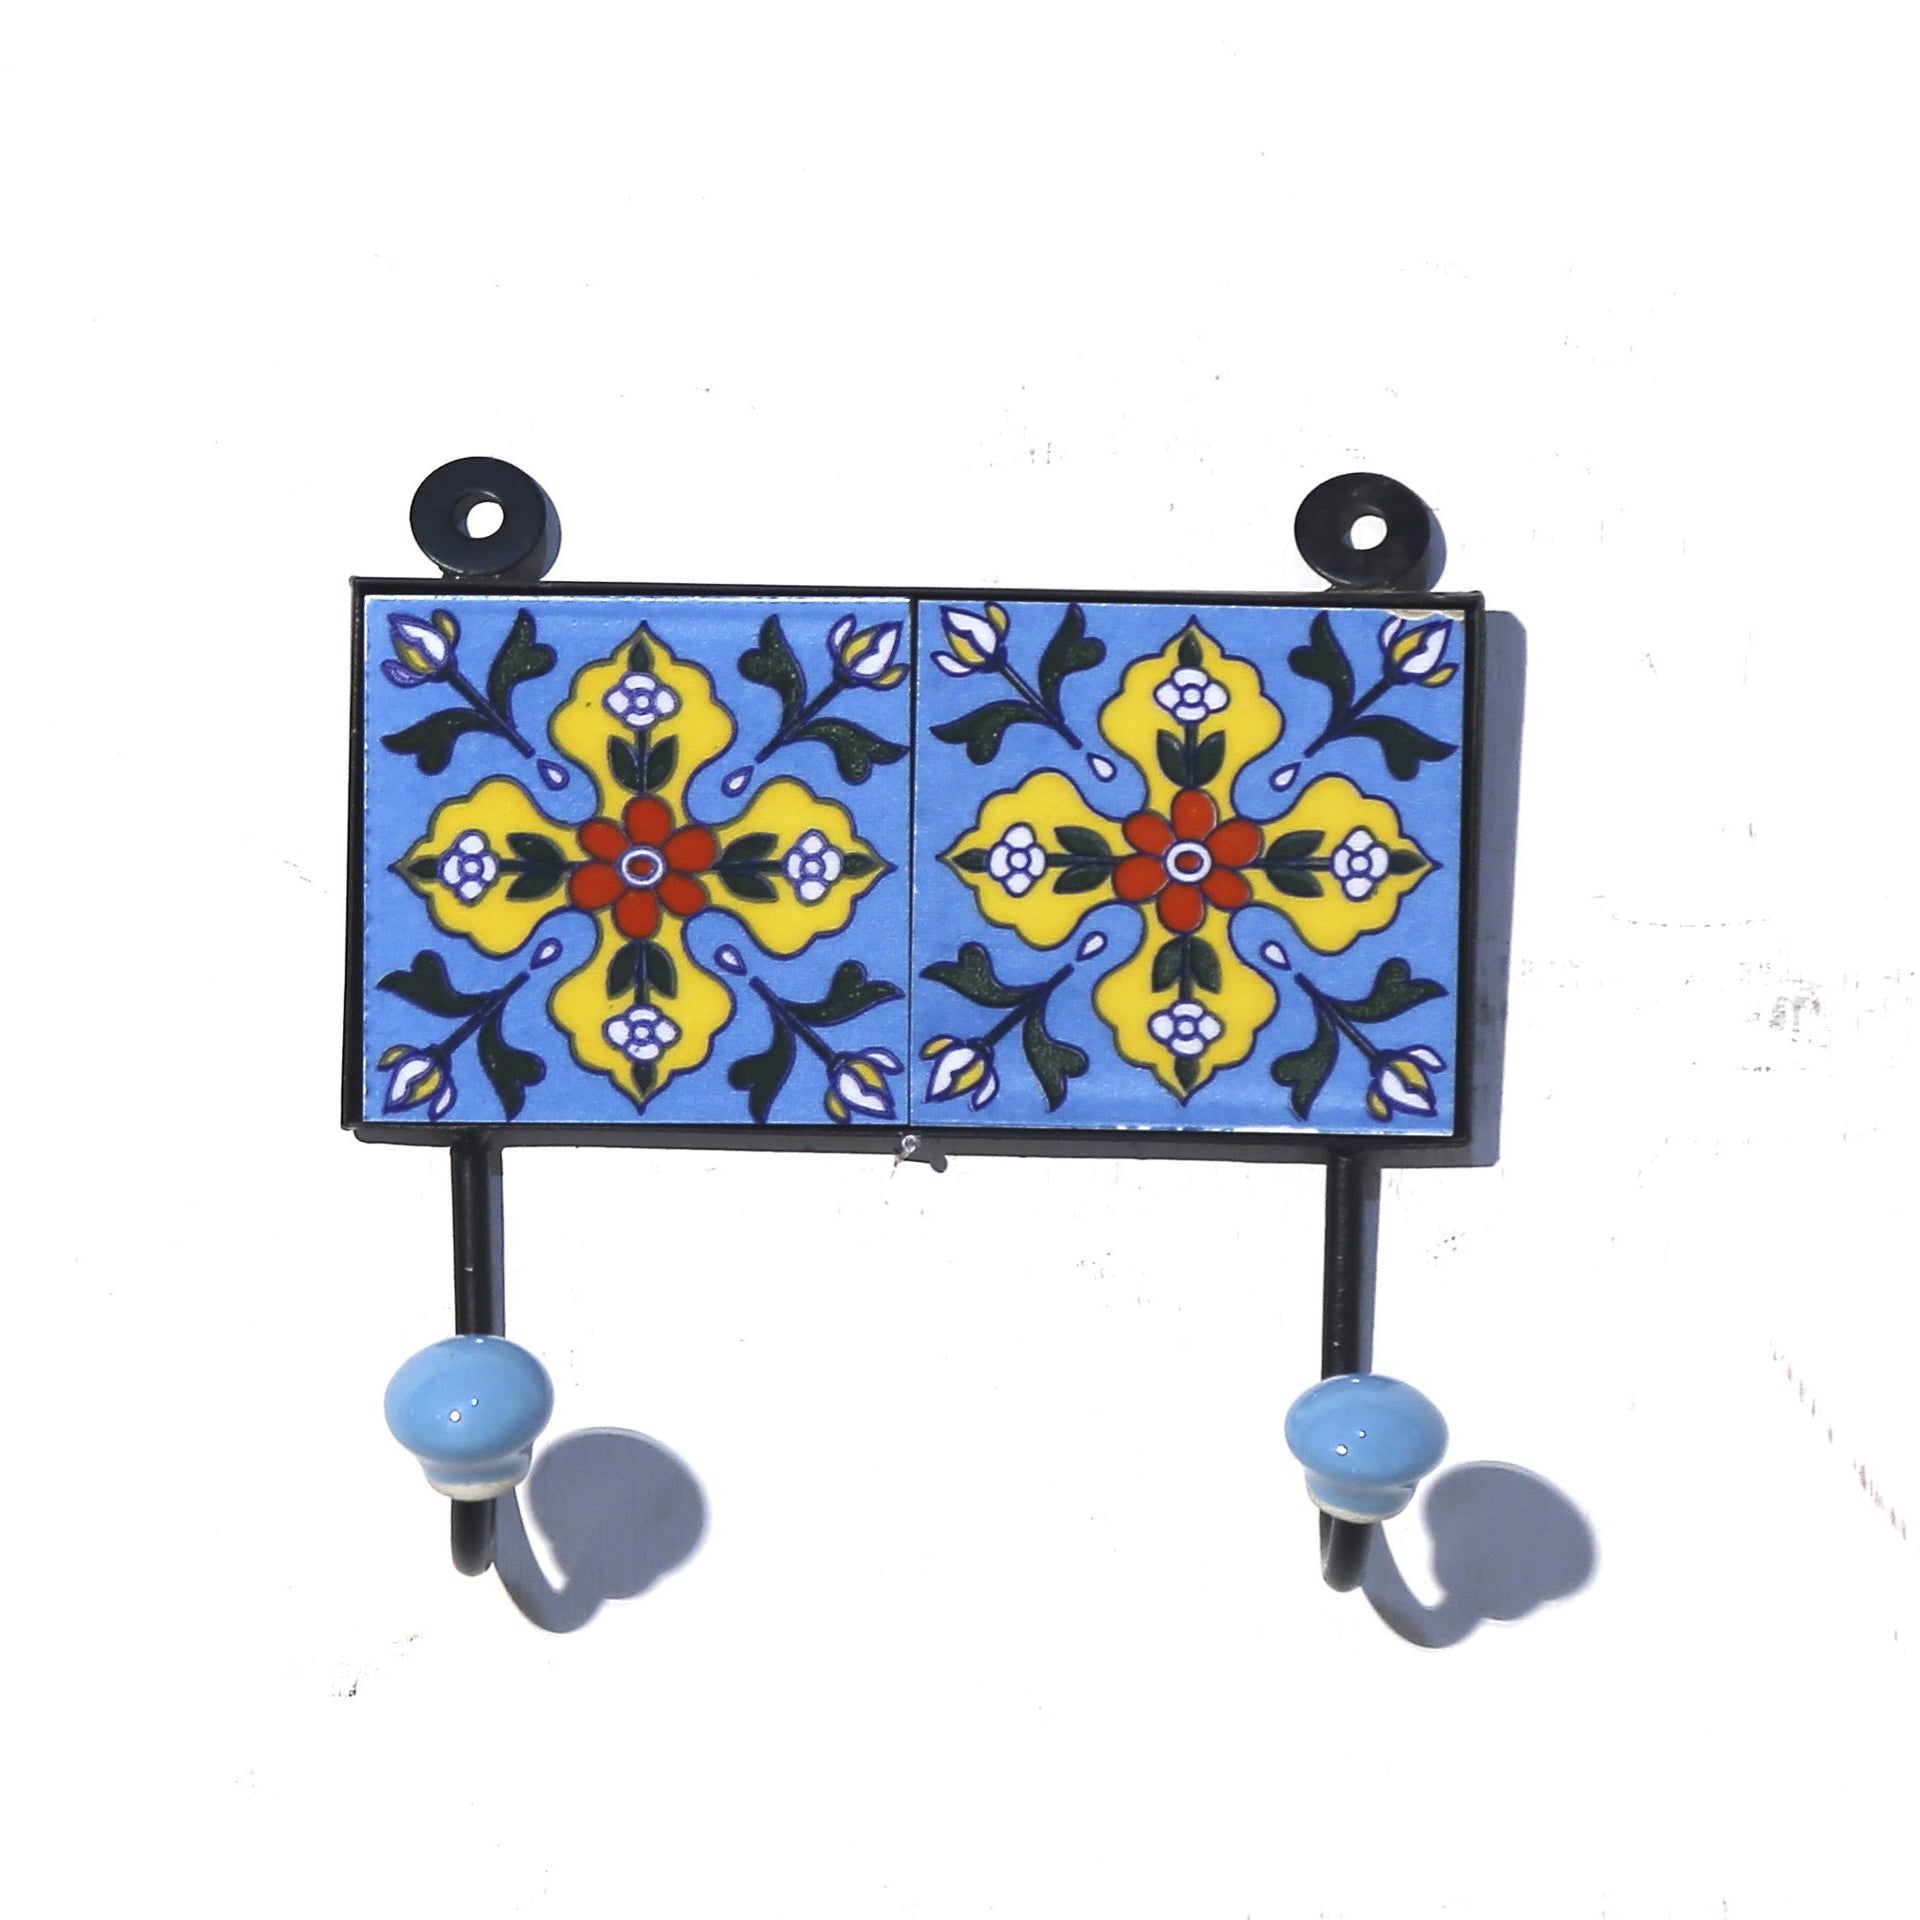 3 by 6 Tile Hook with Metallic Frame Hook